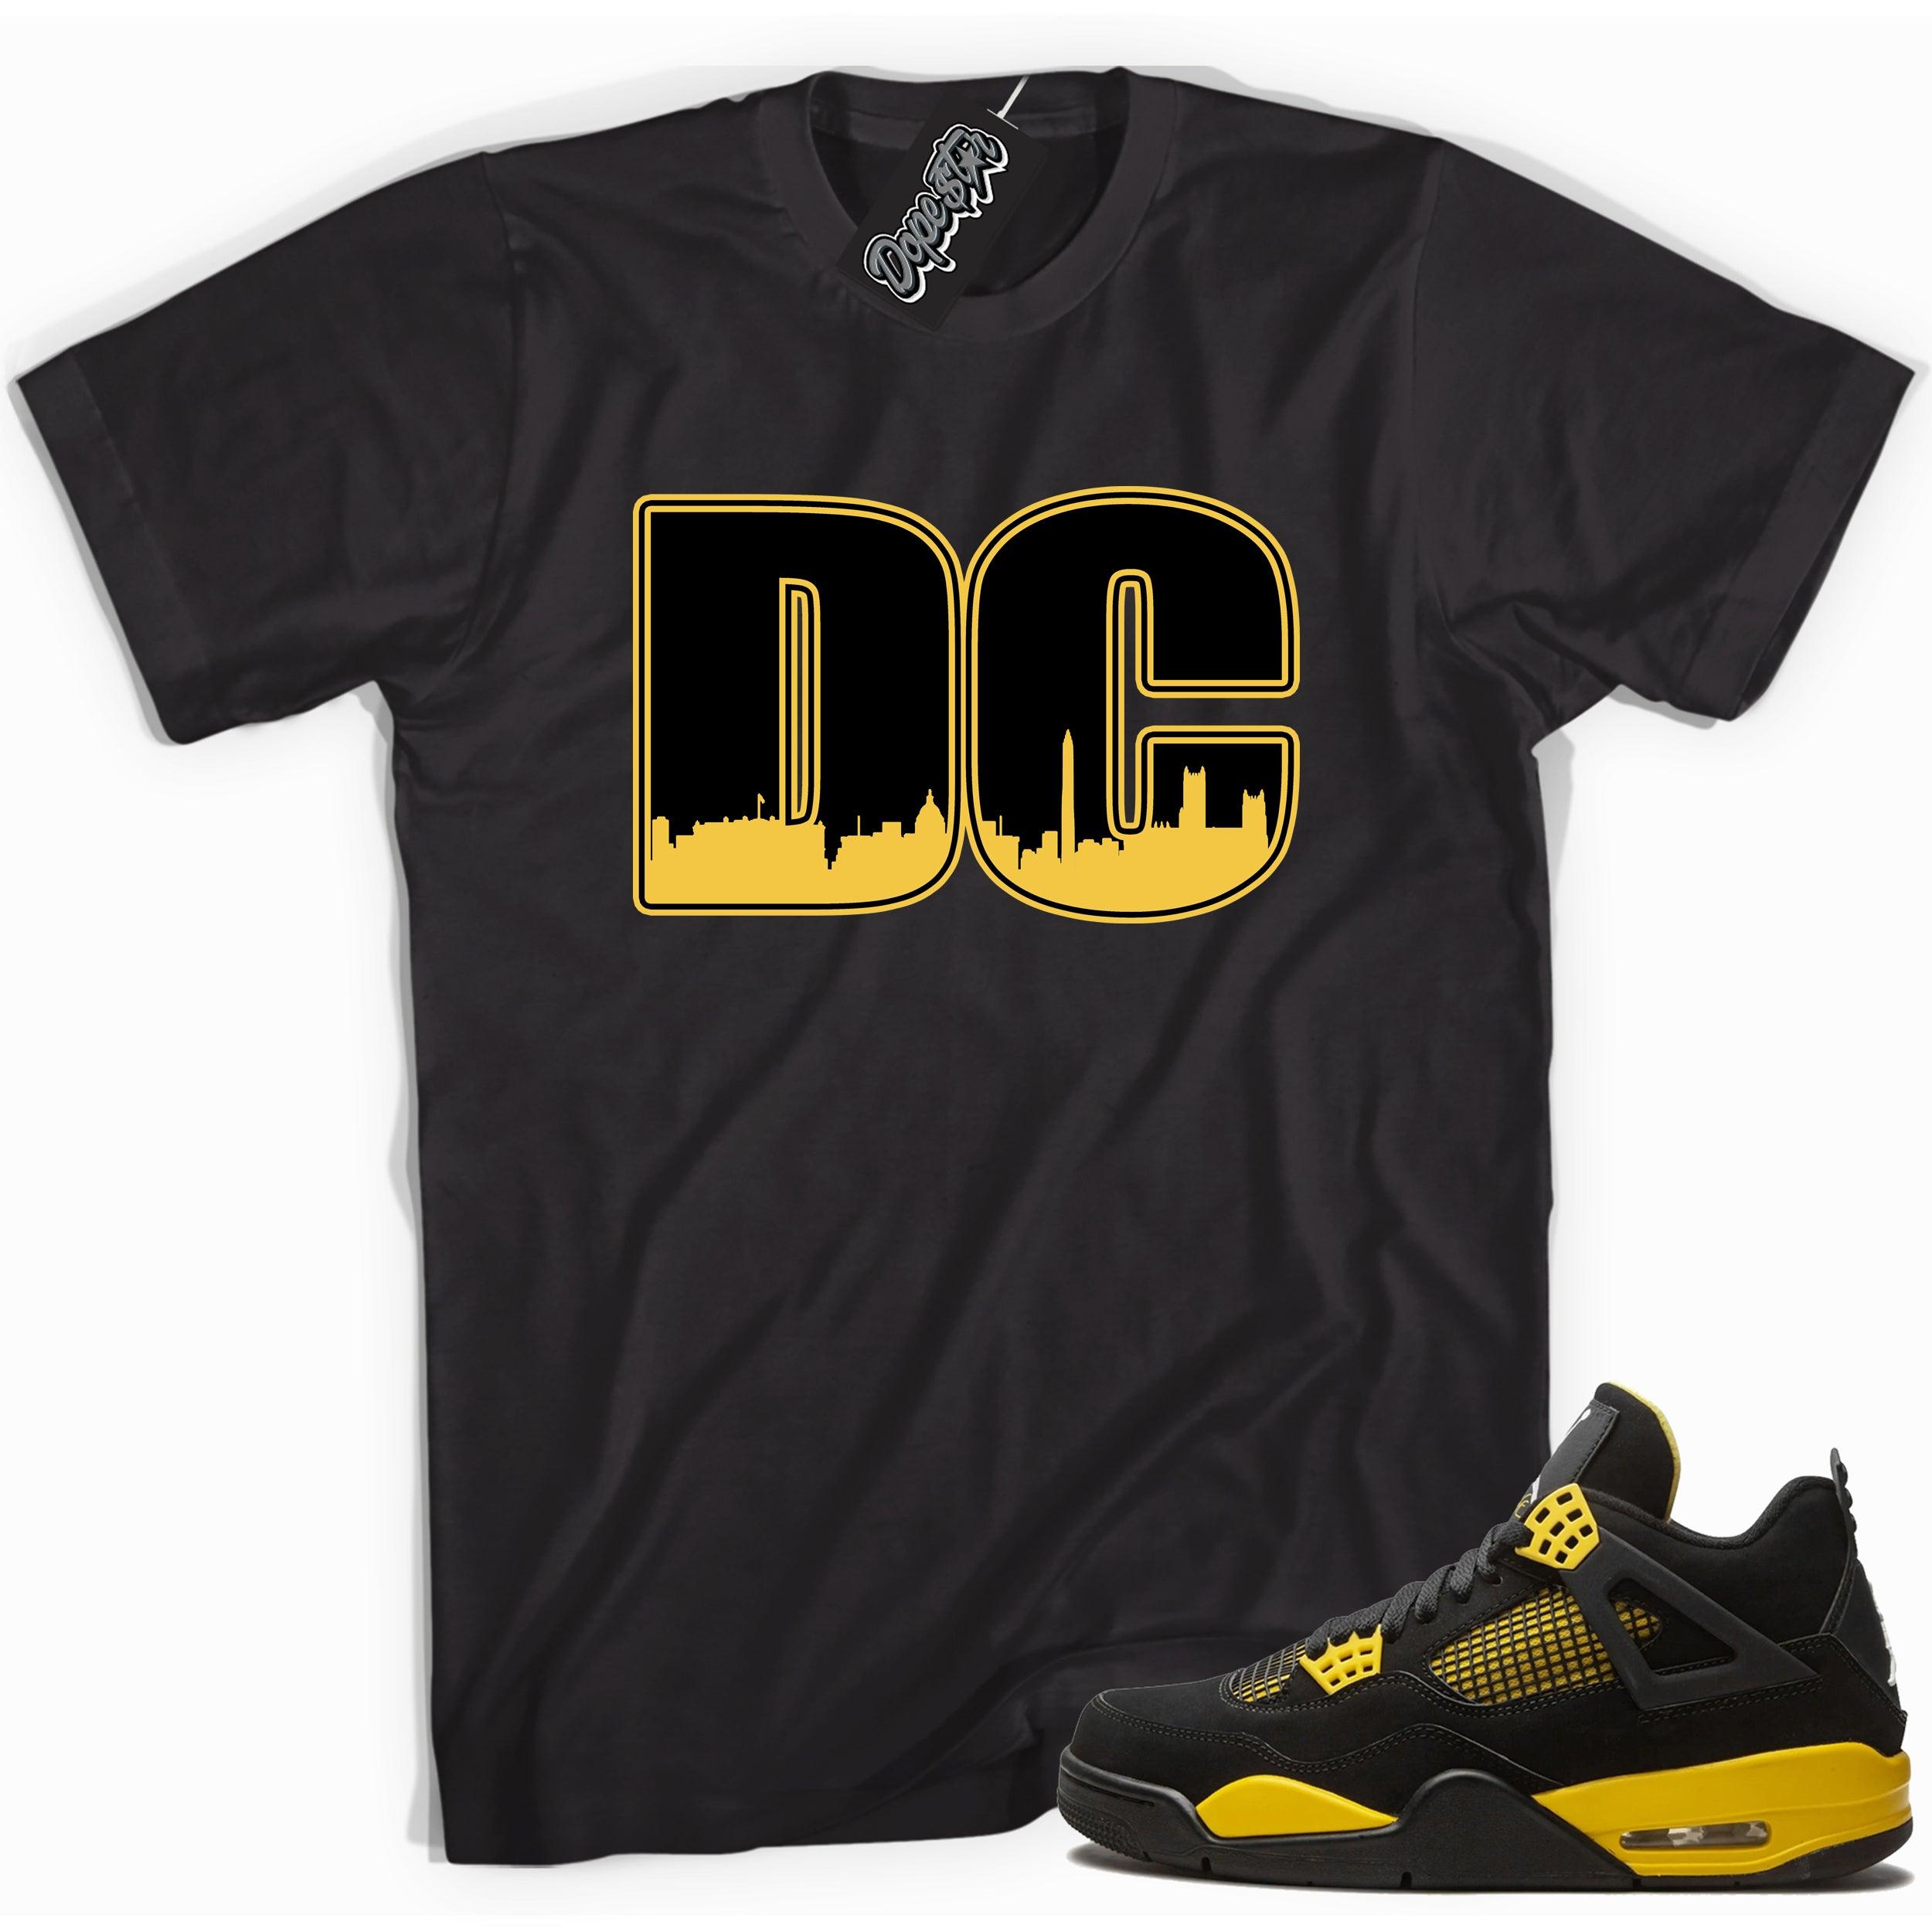 Cool black graphic tee with 'DC' print, that perfectly matches  Air Jordan 4 Thunder sneakers